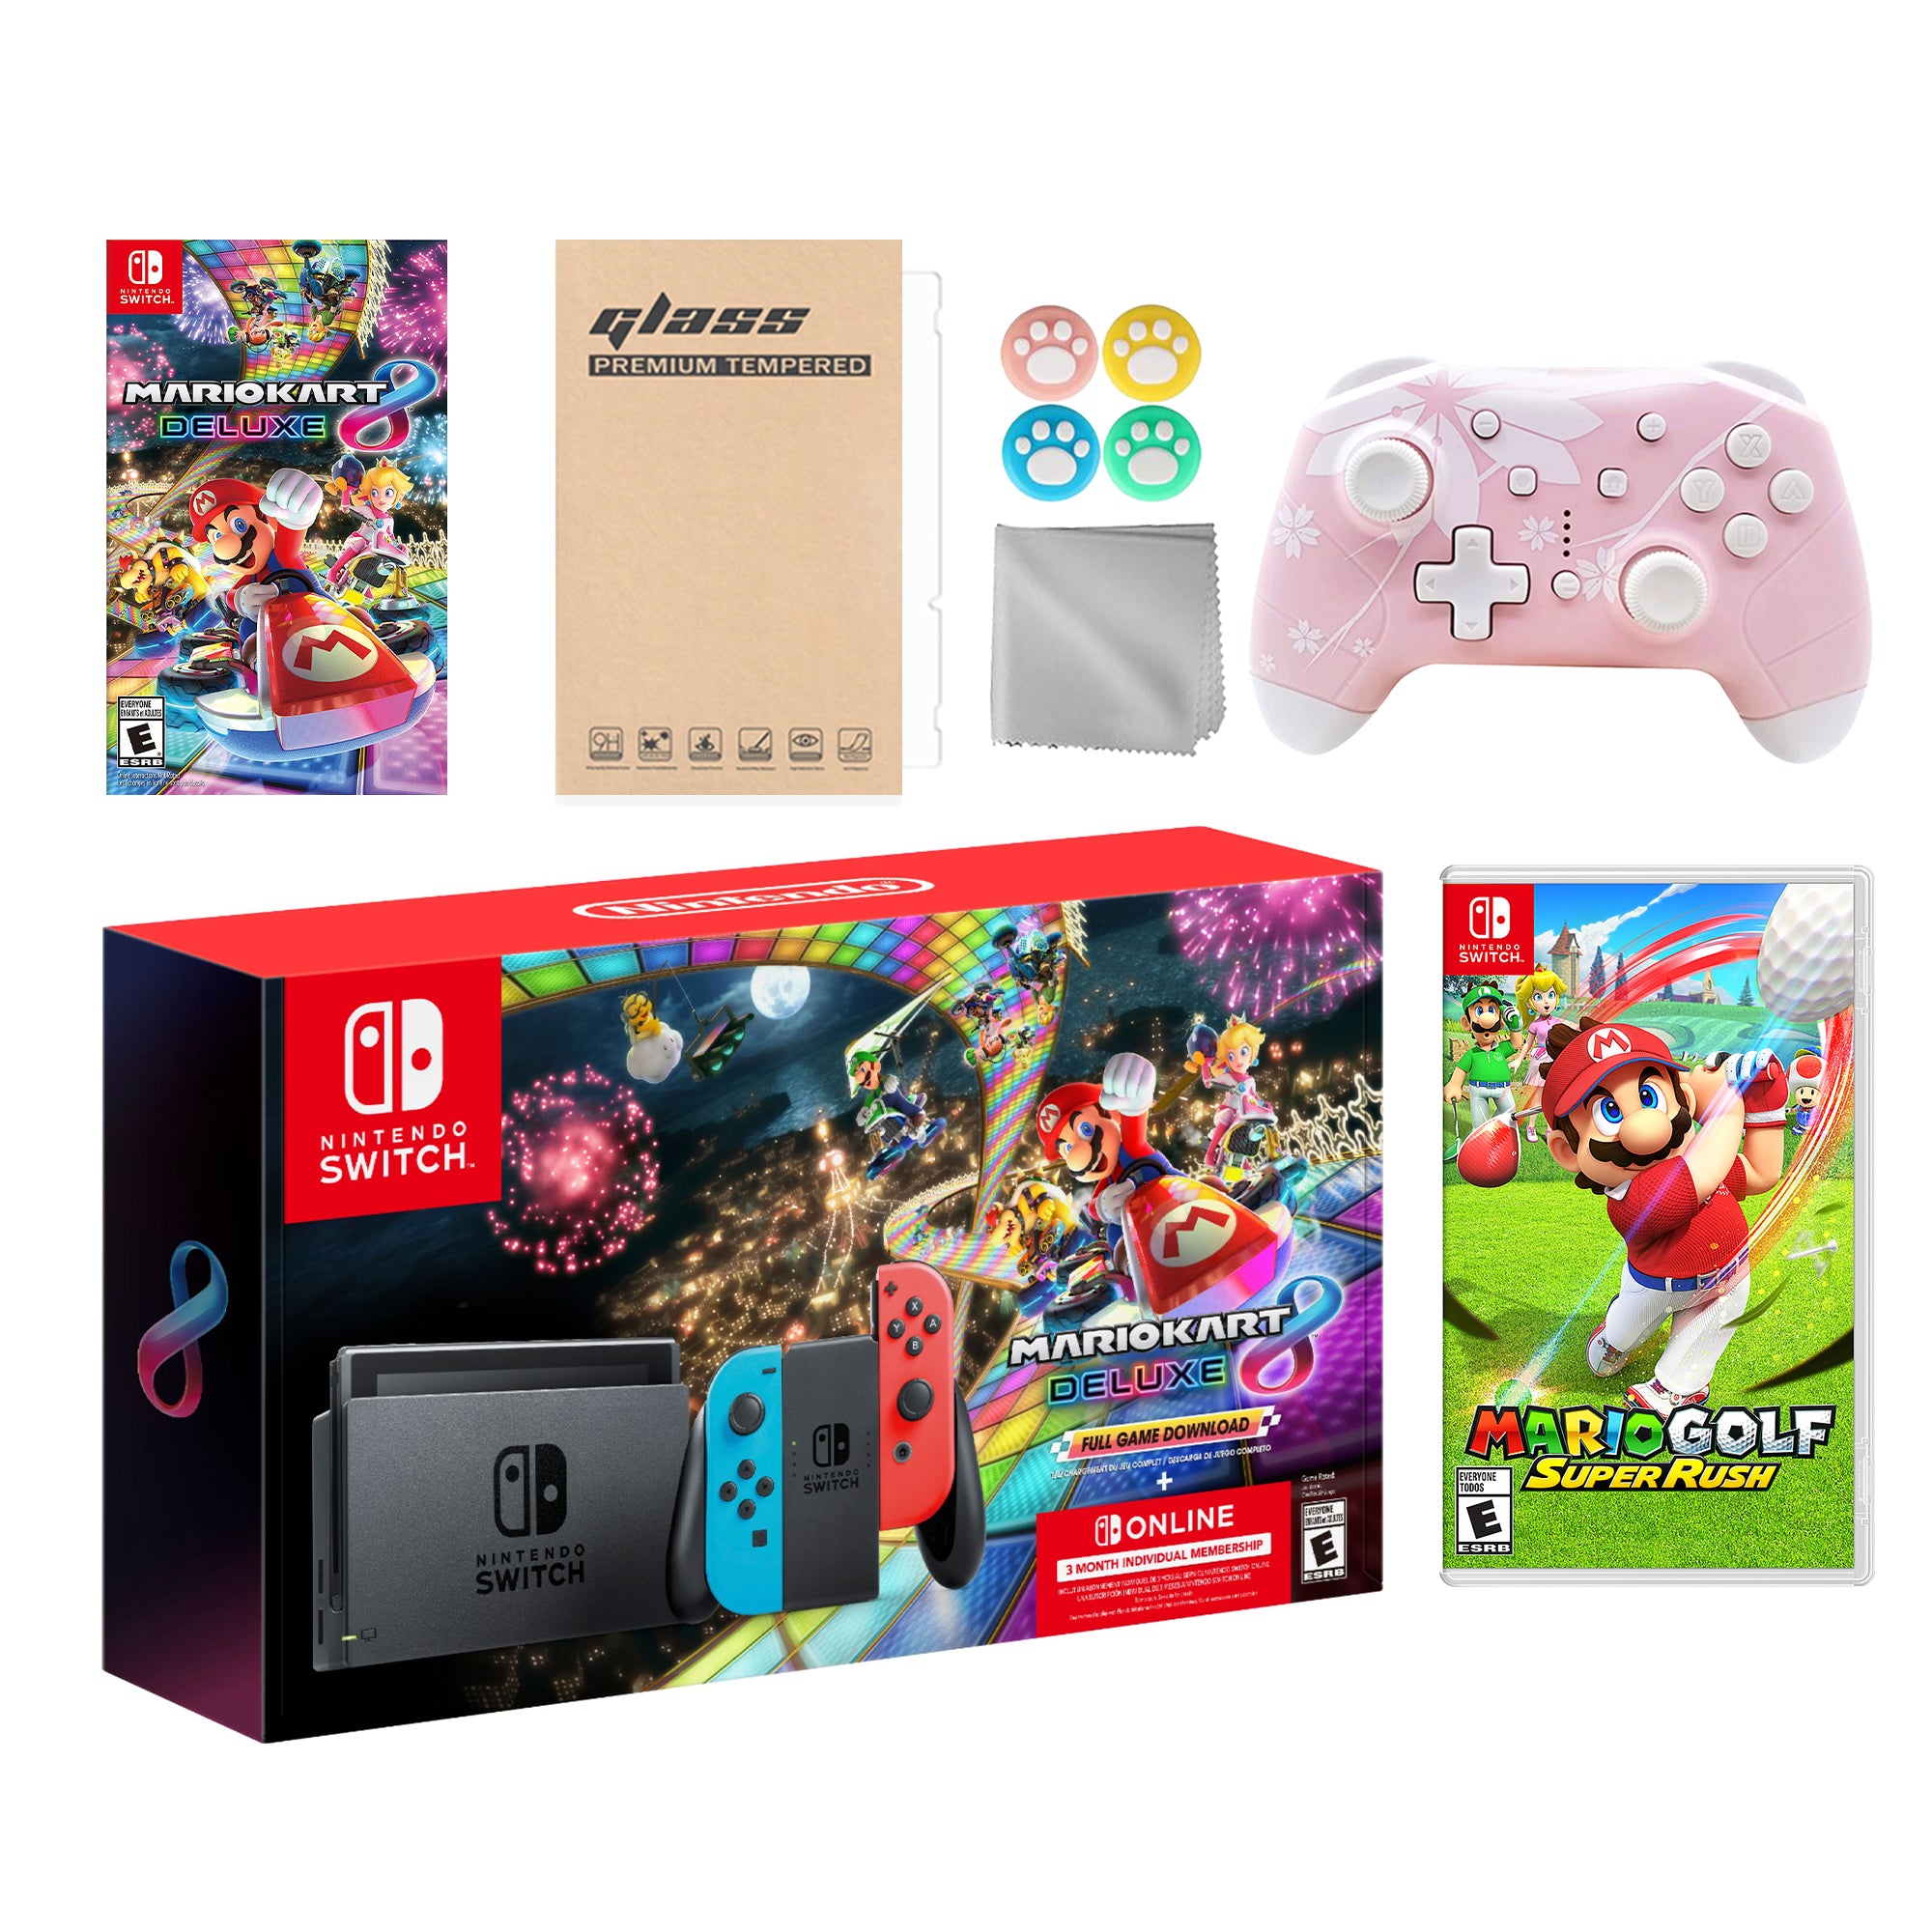 Nintendo Switch Mario Kart 8 Deluxe Bundle: Red Blue Console, Mario Kart 8 & Membership, Mario Golf: Super Rush , Mytrix Wireless Pro Controller Pink Cherry Blossom and Accessories